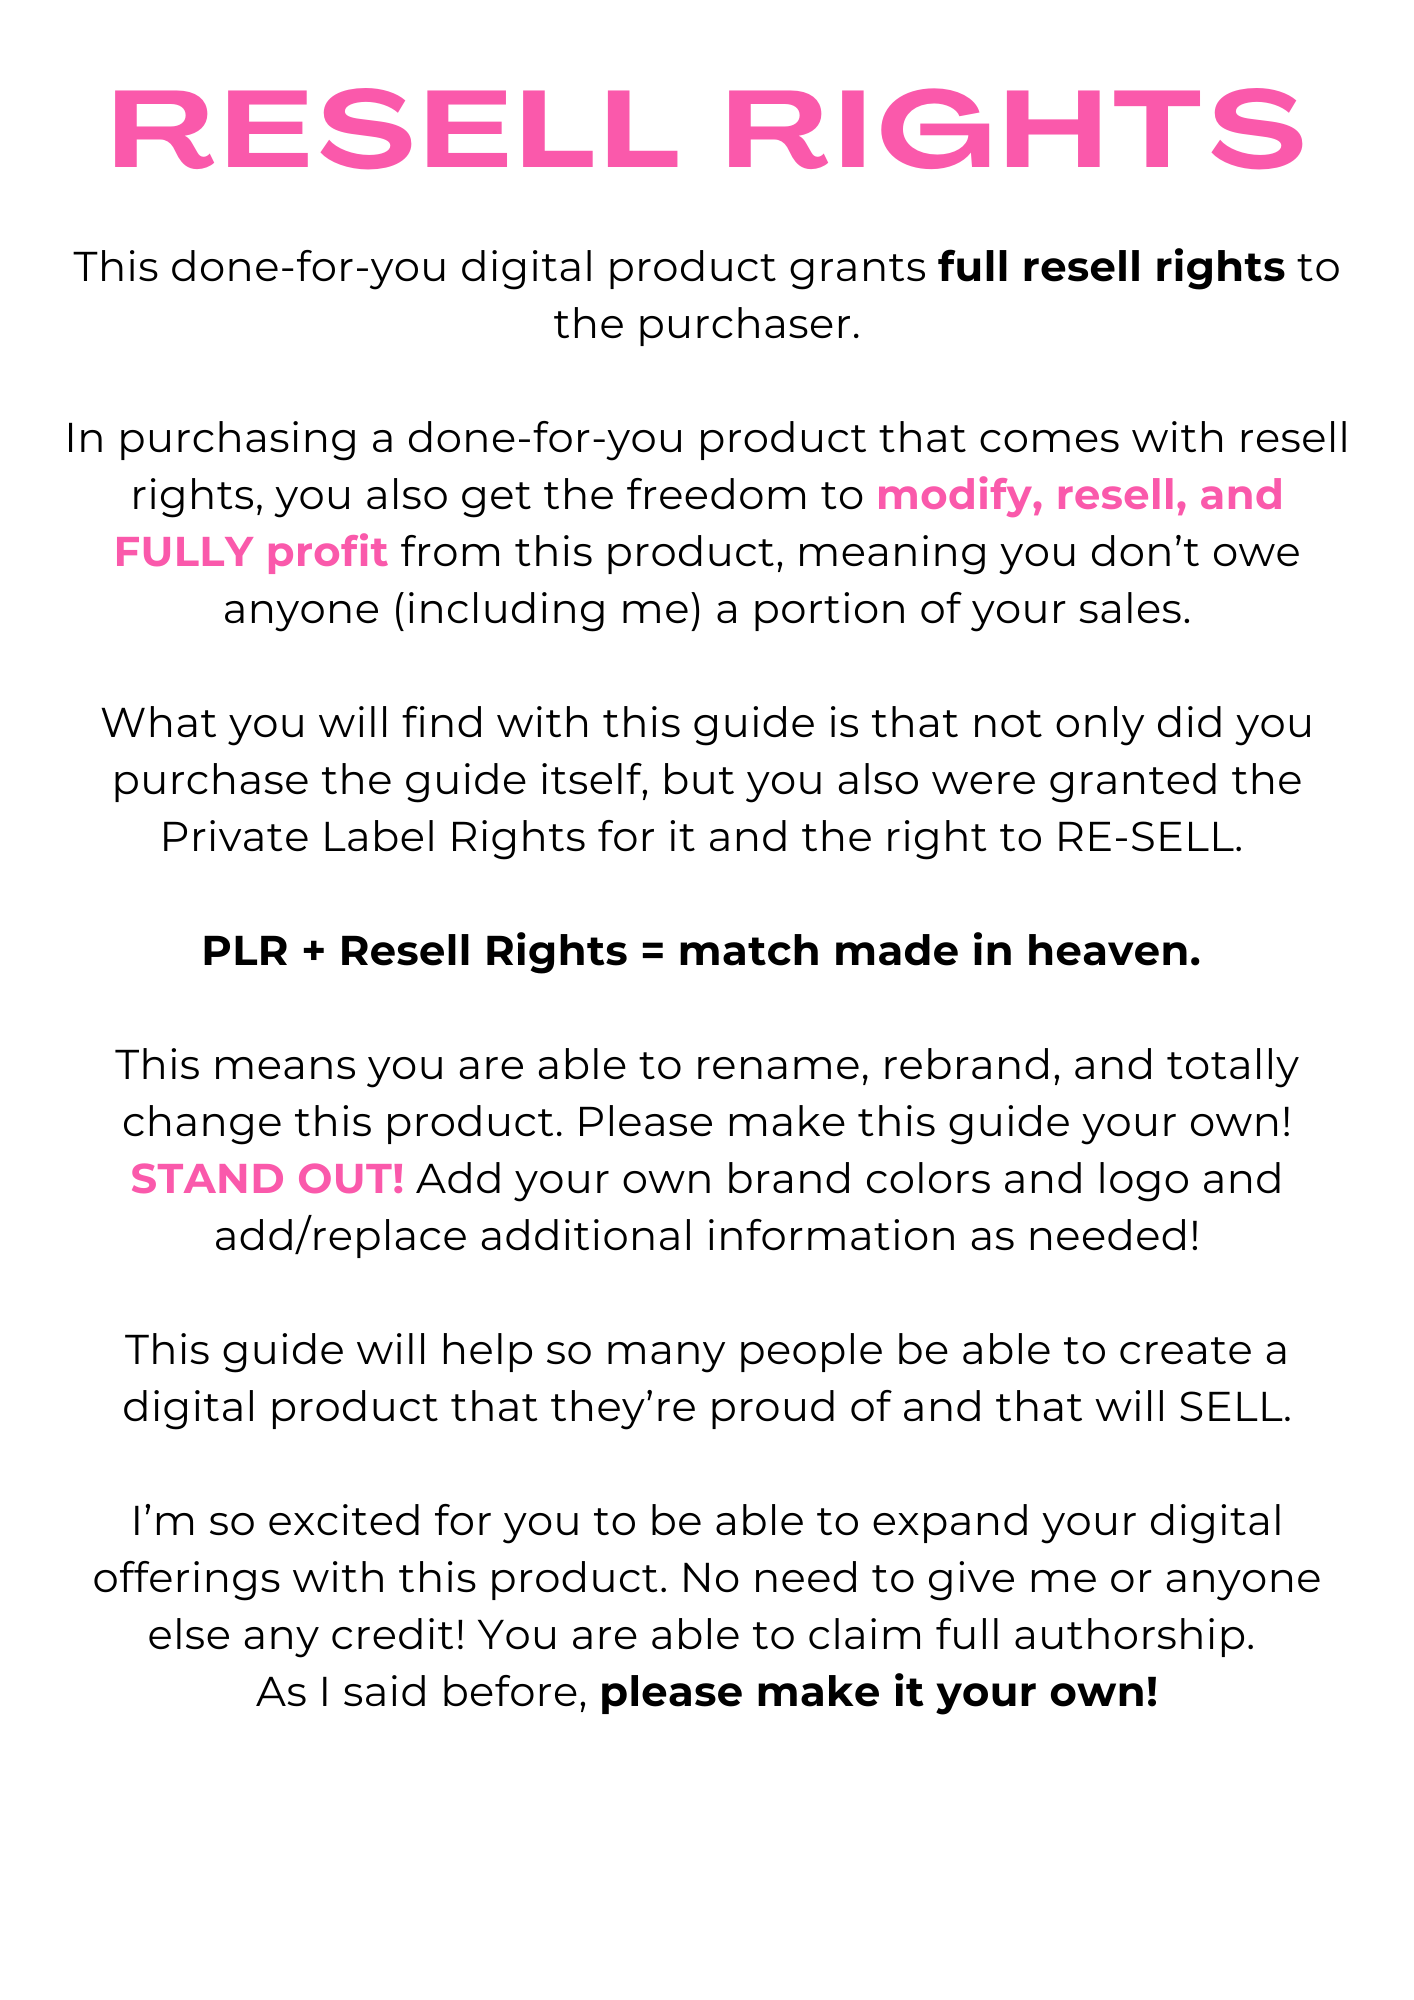 IG Growth Guide [With Resell Rights]